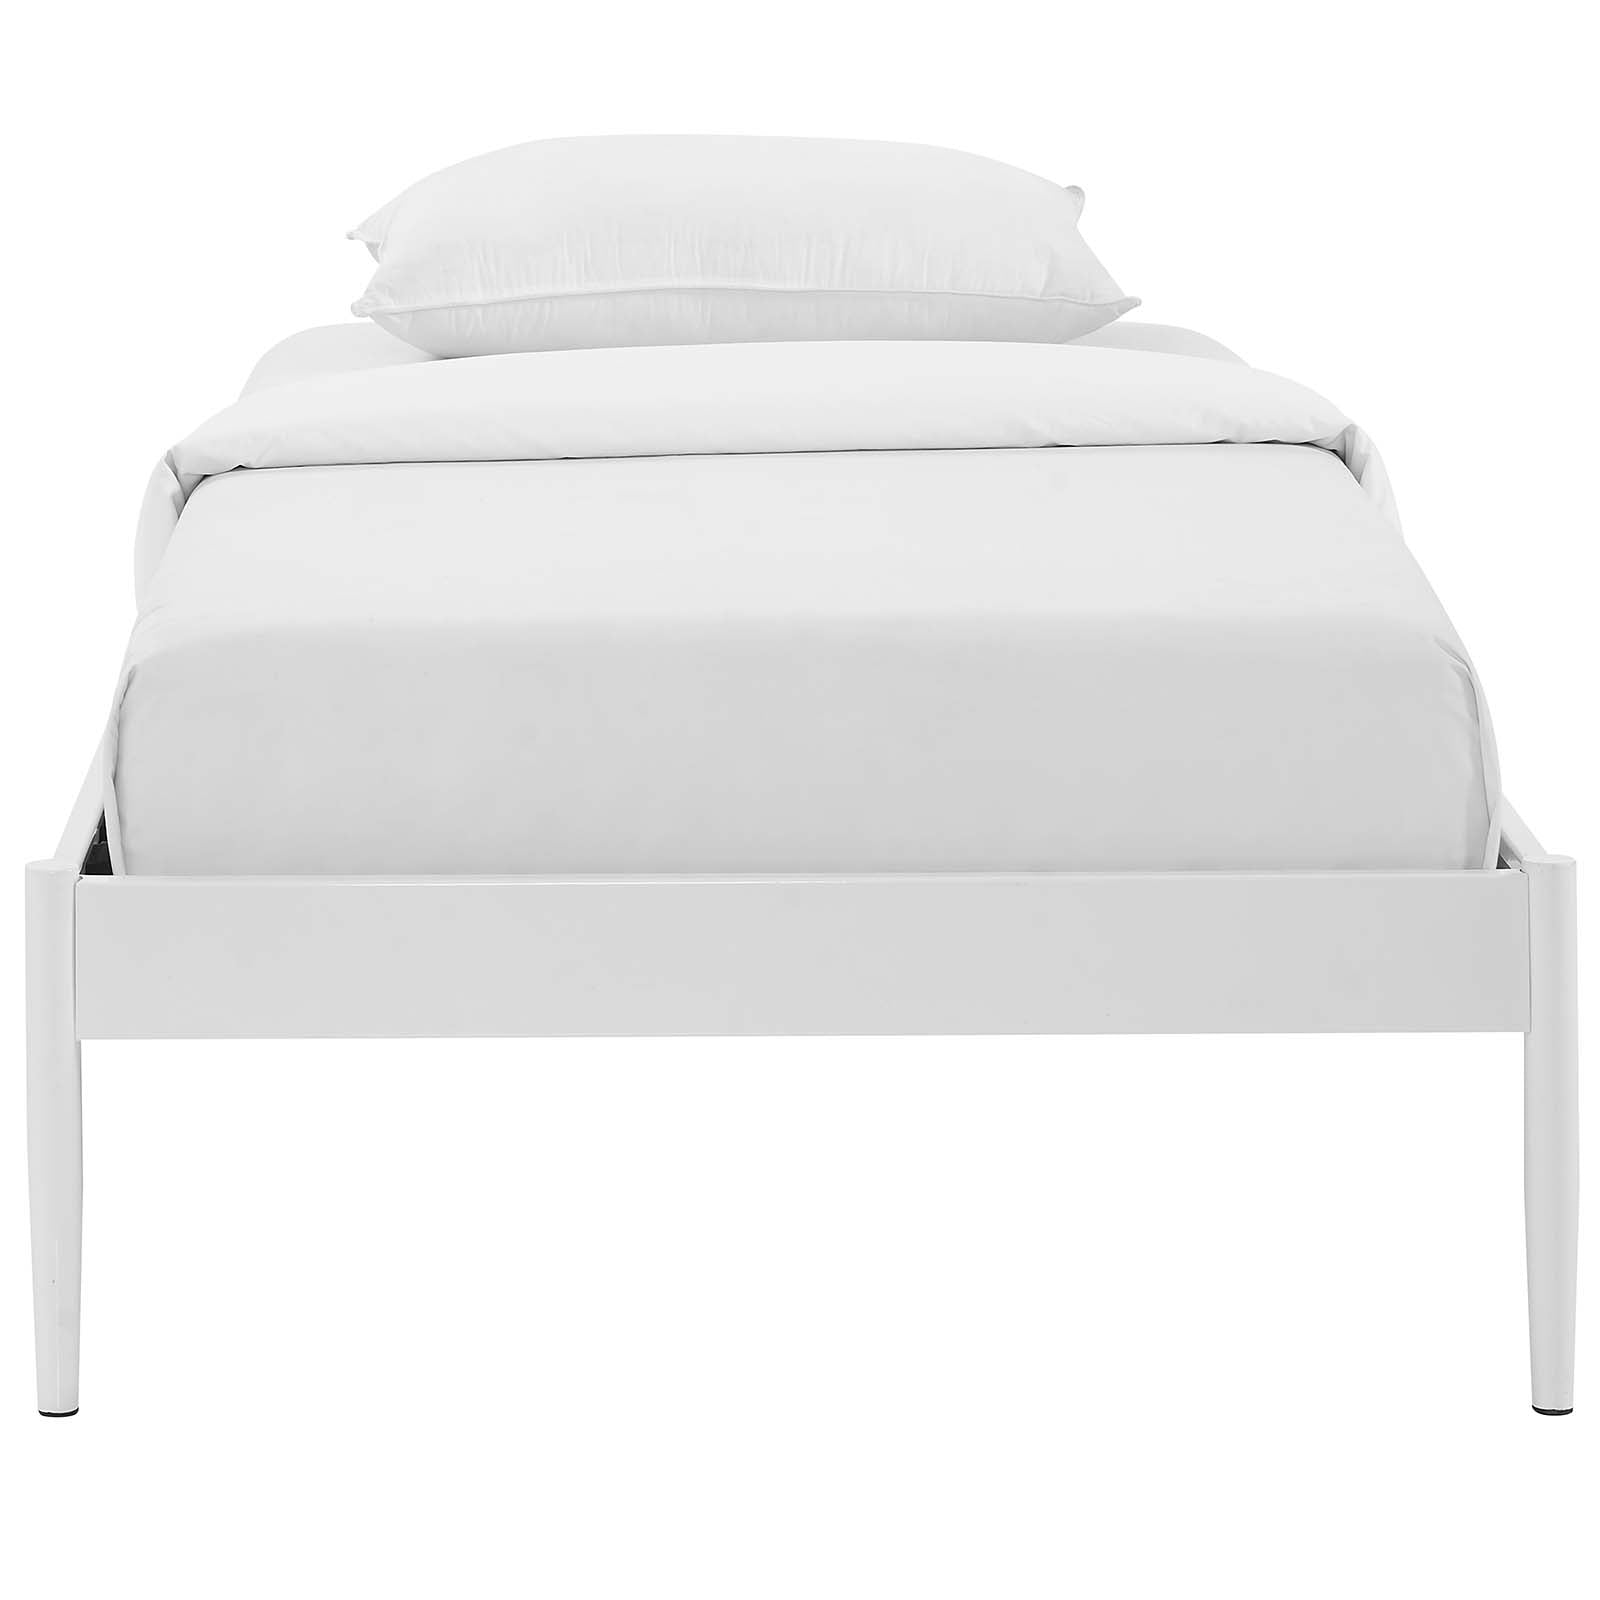 Modway Beds - Elsie Twin Bed Frame White